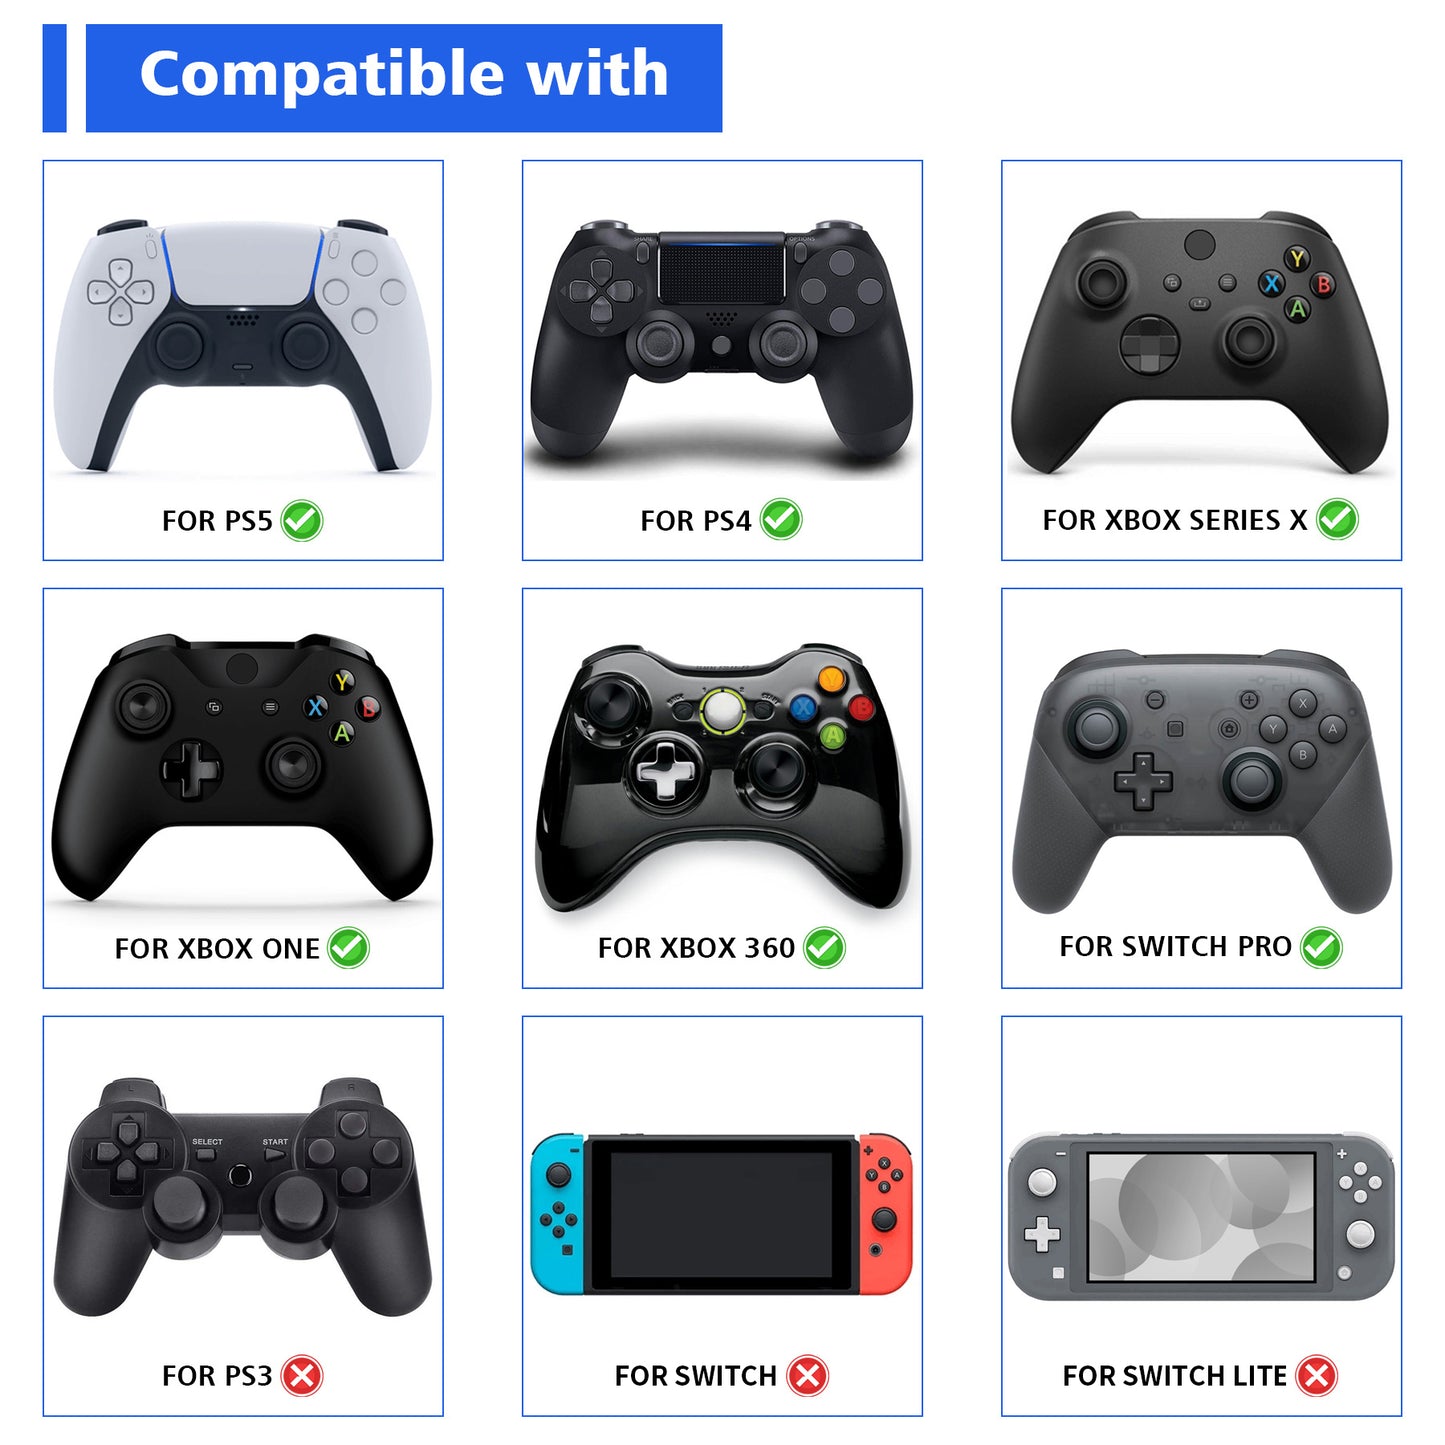 PlayVital Cute Thumb Grip Caps for ps5/4 Controller, Silicone Analog Stick Caps Cover for Xbox Series X/S, Thumbstick Caps for Switch Pro Controller - Chubby Piggy - PJM3011 PlayVital